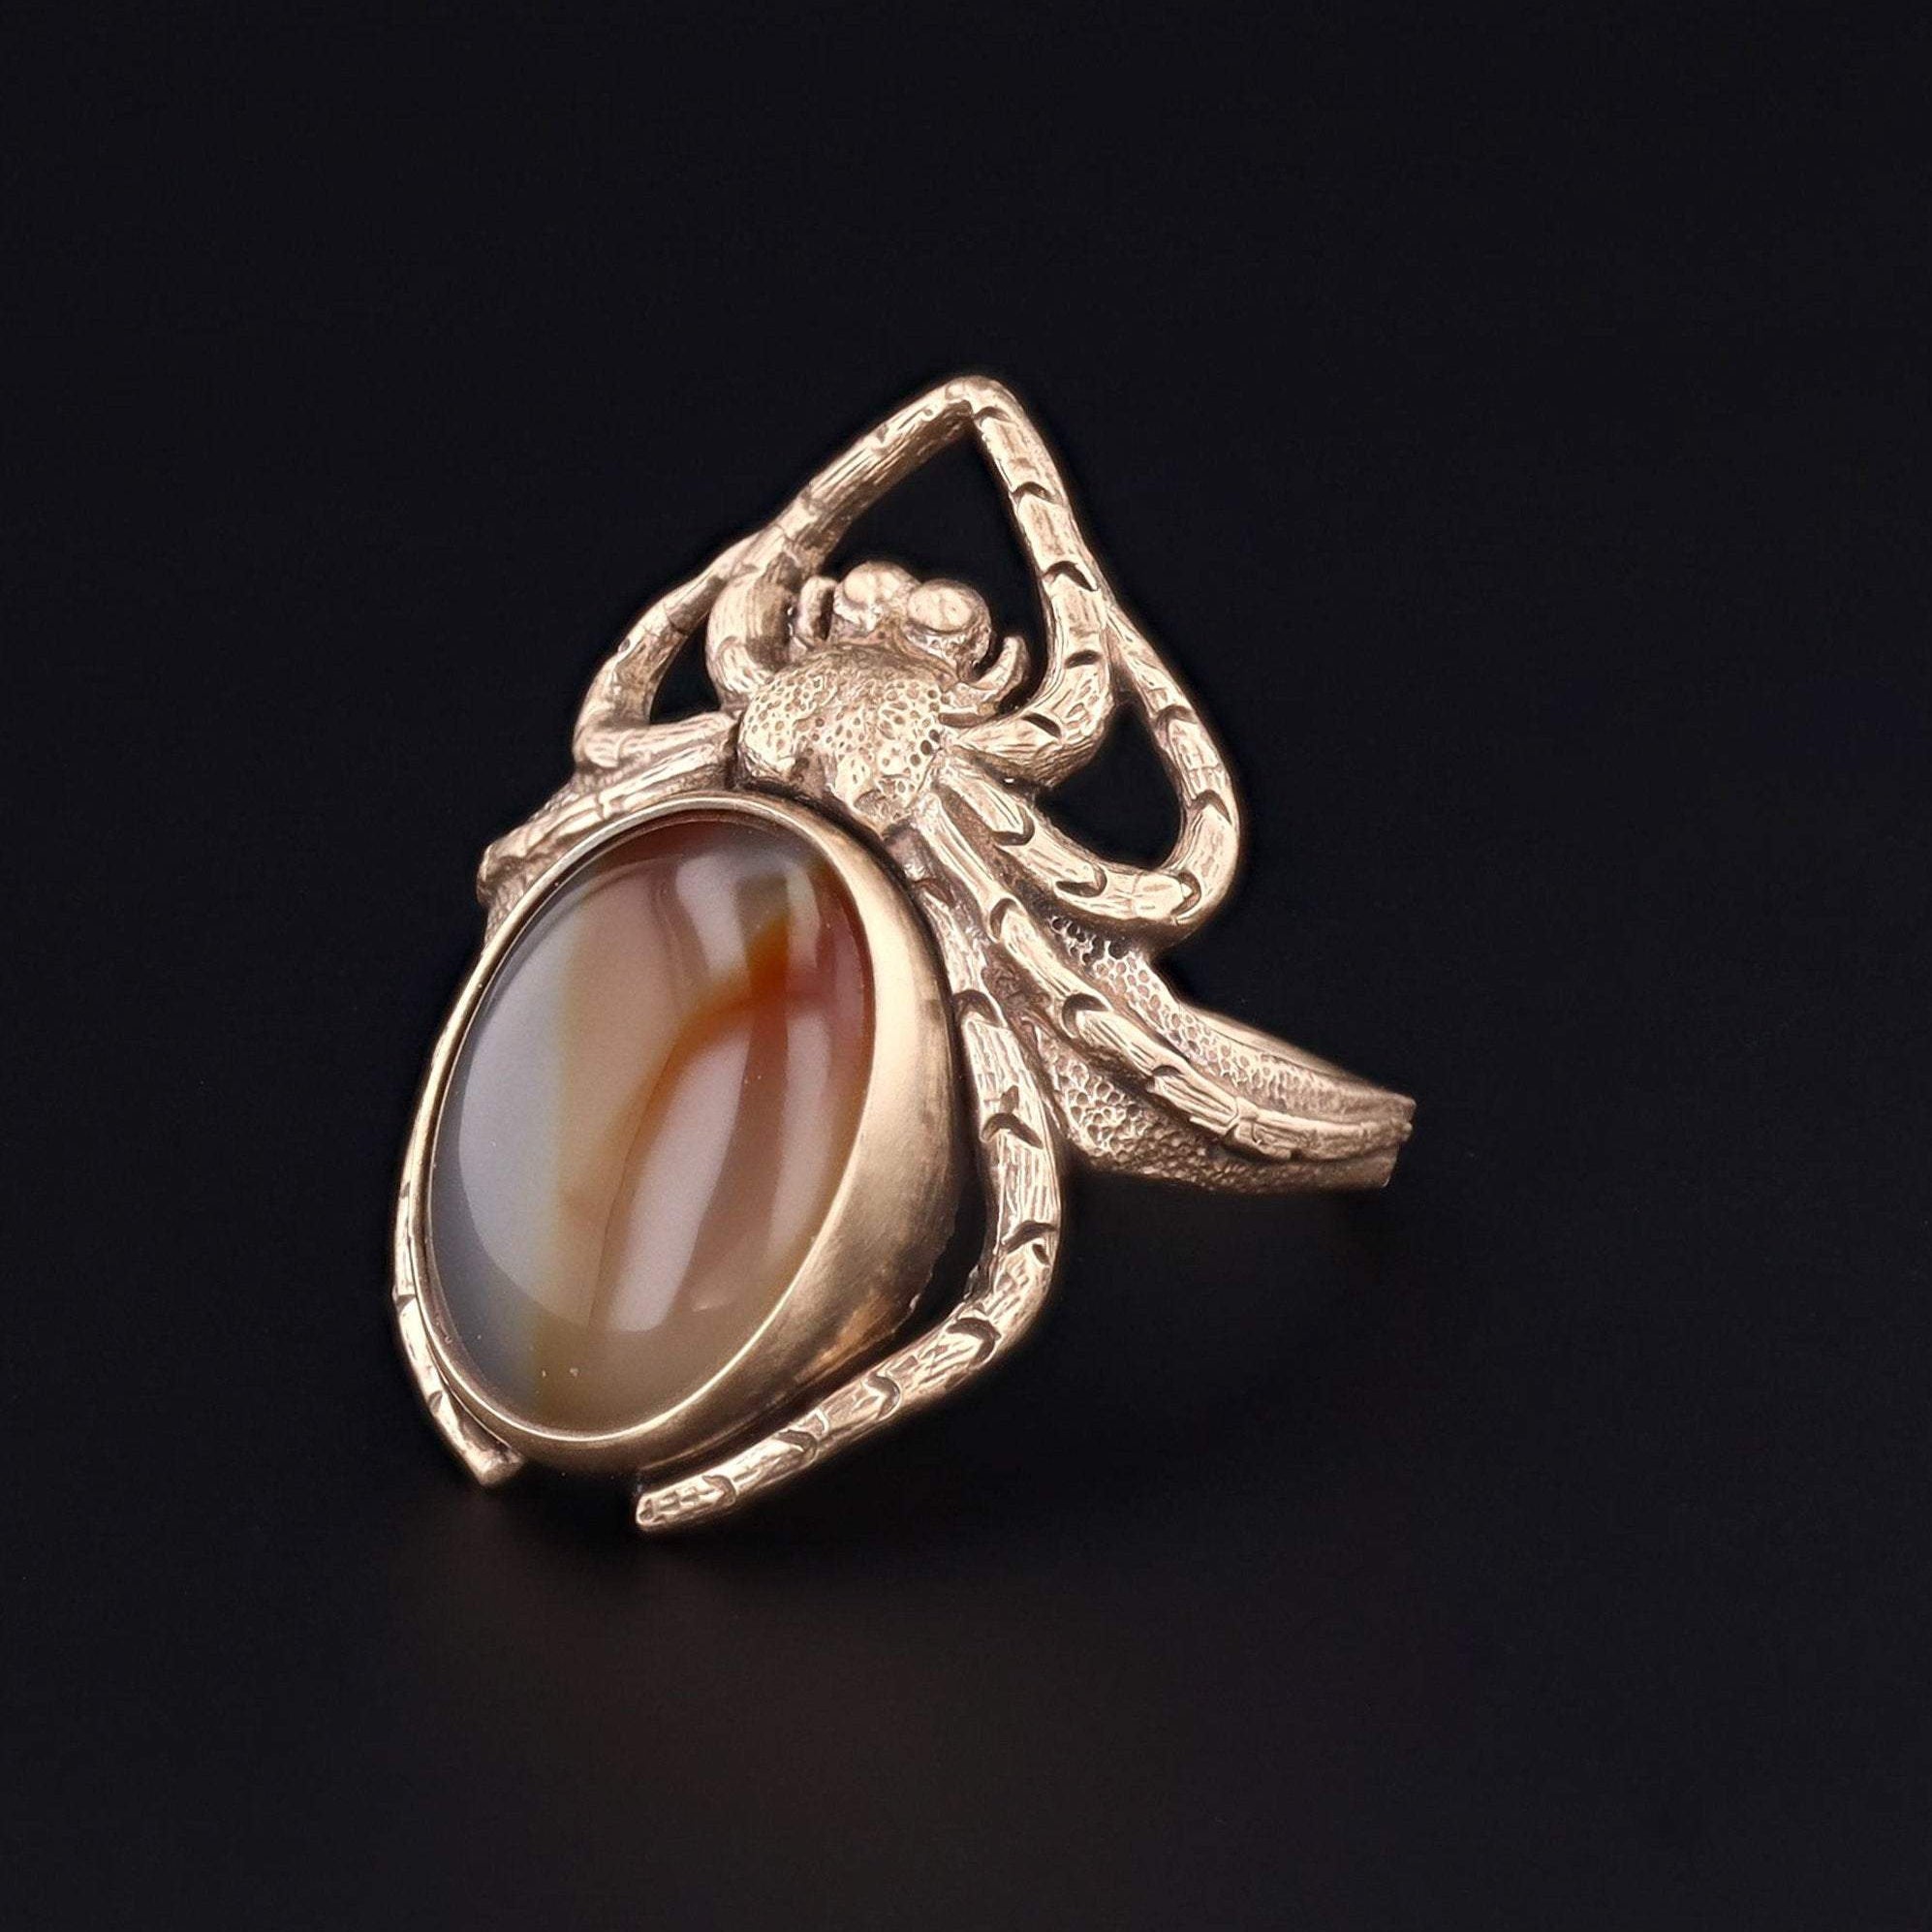 Spider Ring | 14k Gold Agate Spider Ring | 14k Gold Ring | Art Nouveau Style Ring